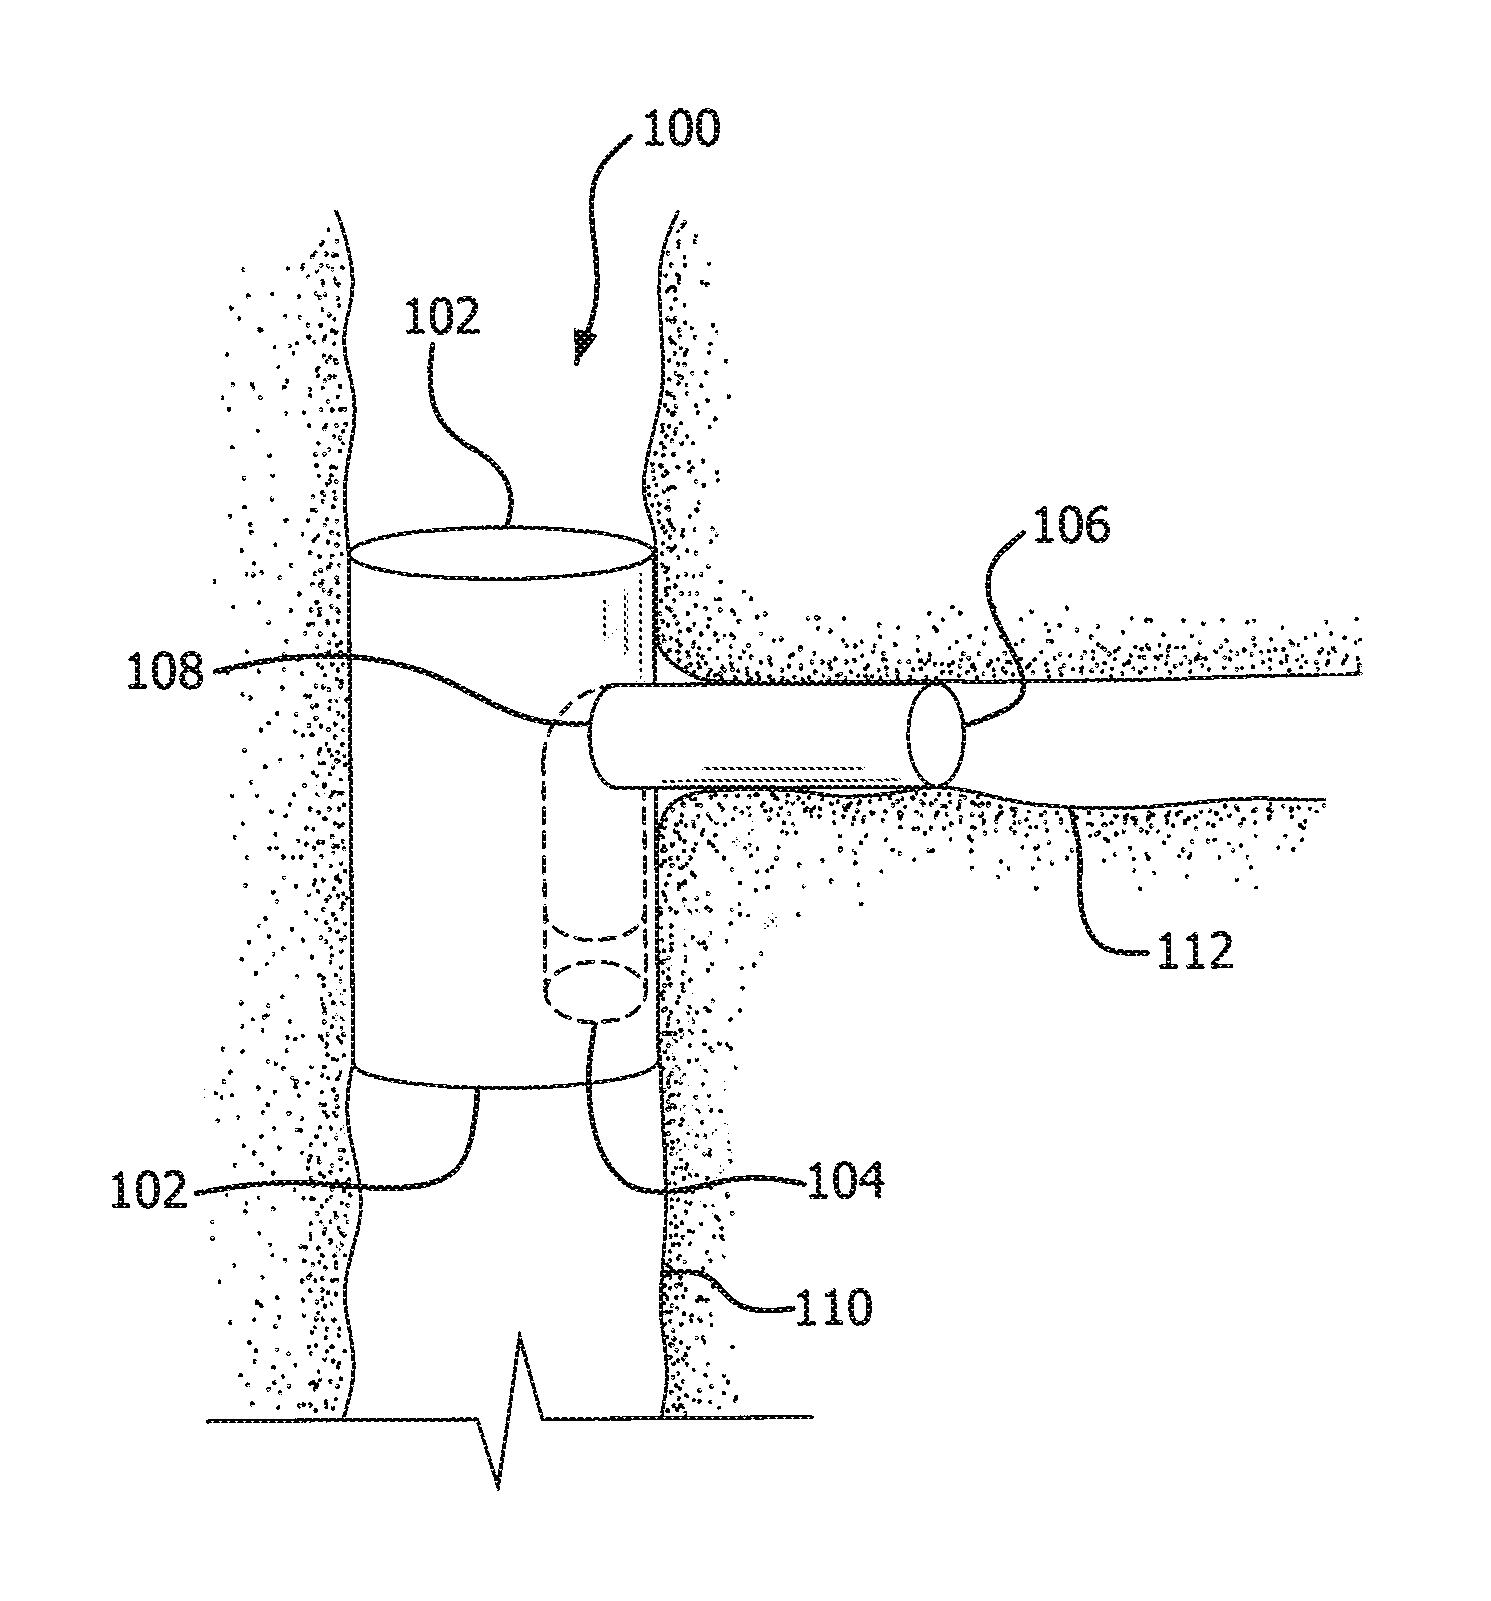 Bifurcated highly conformable medical device branch access